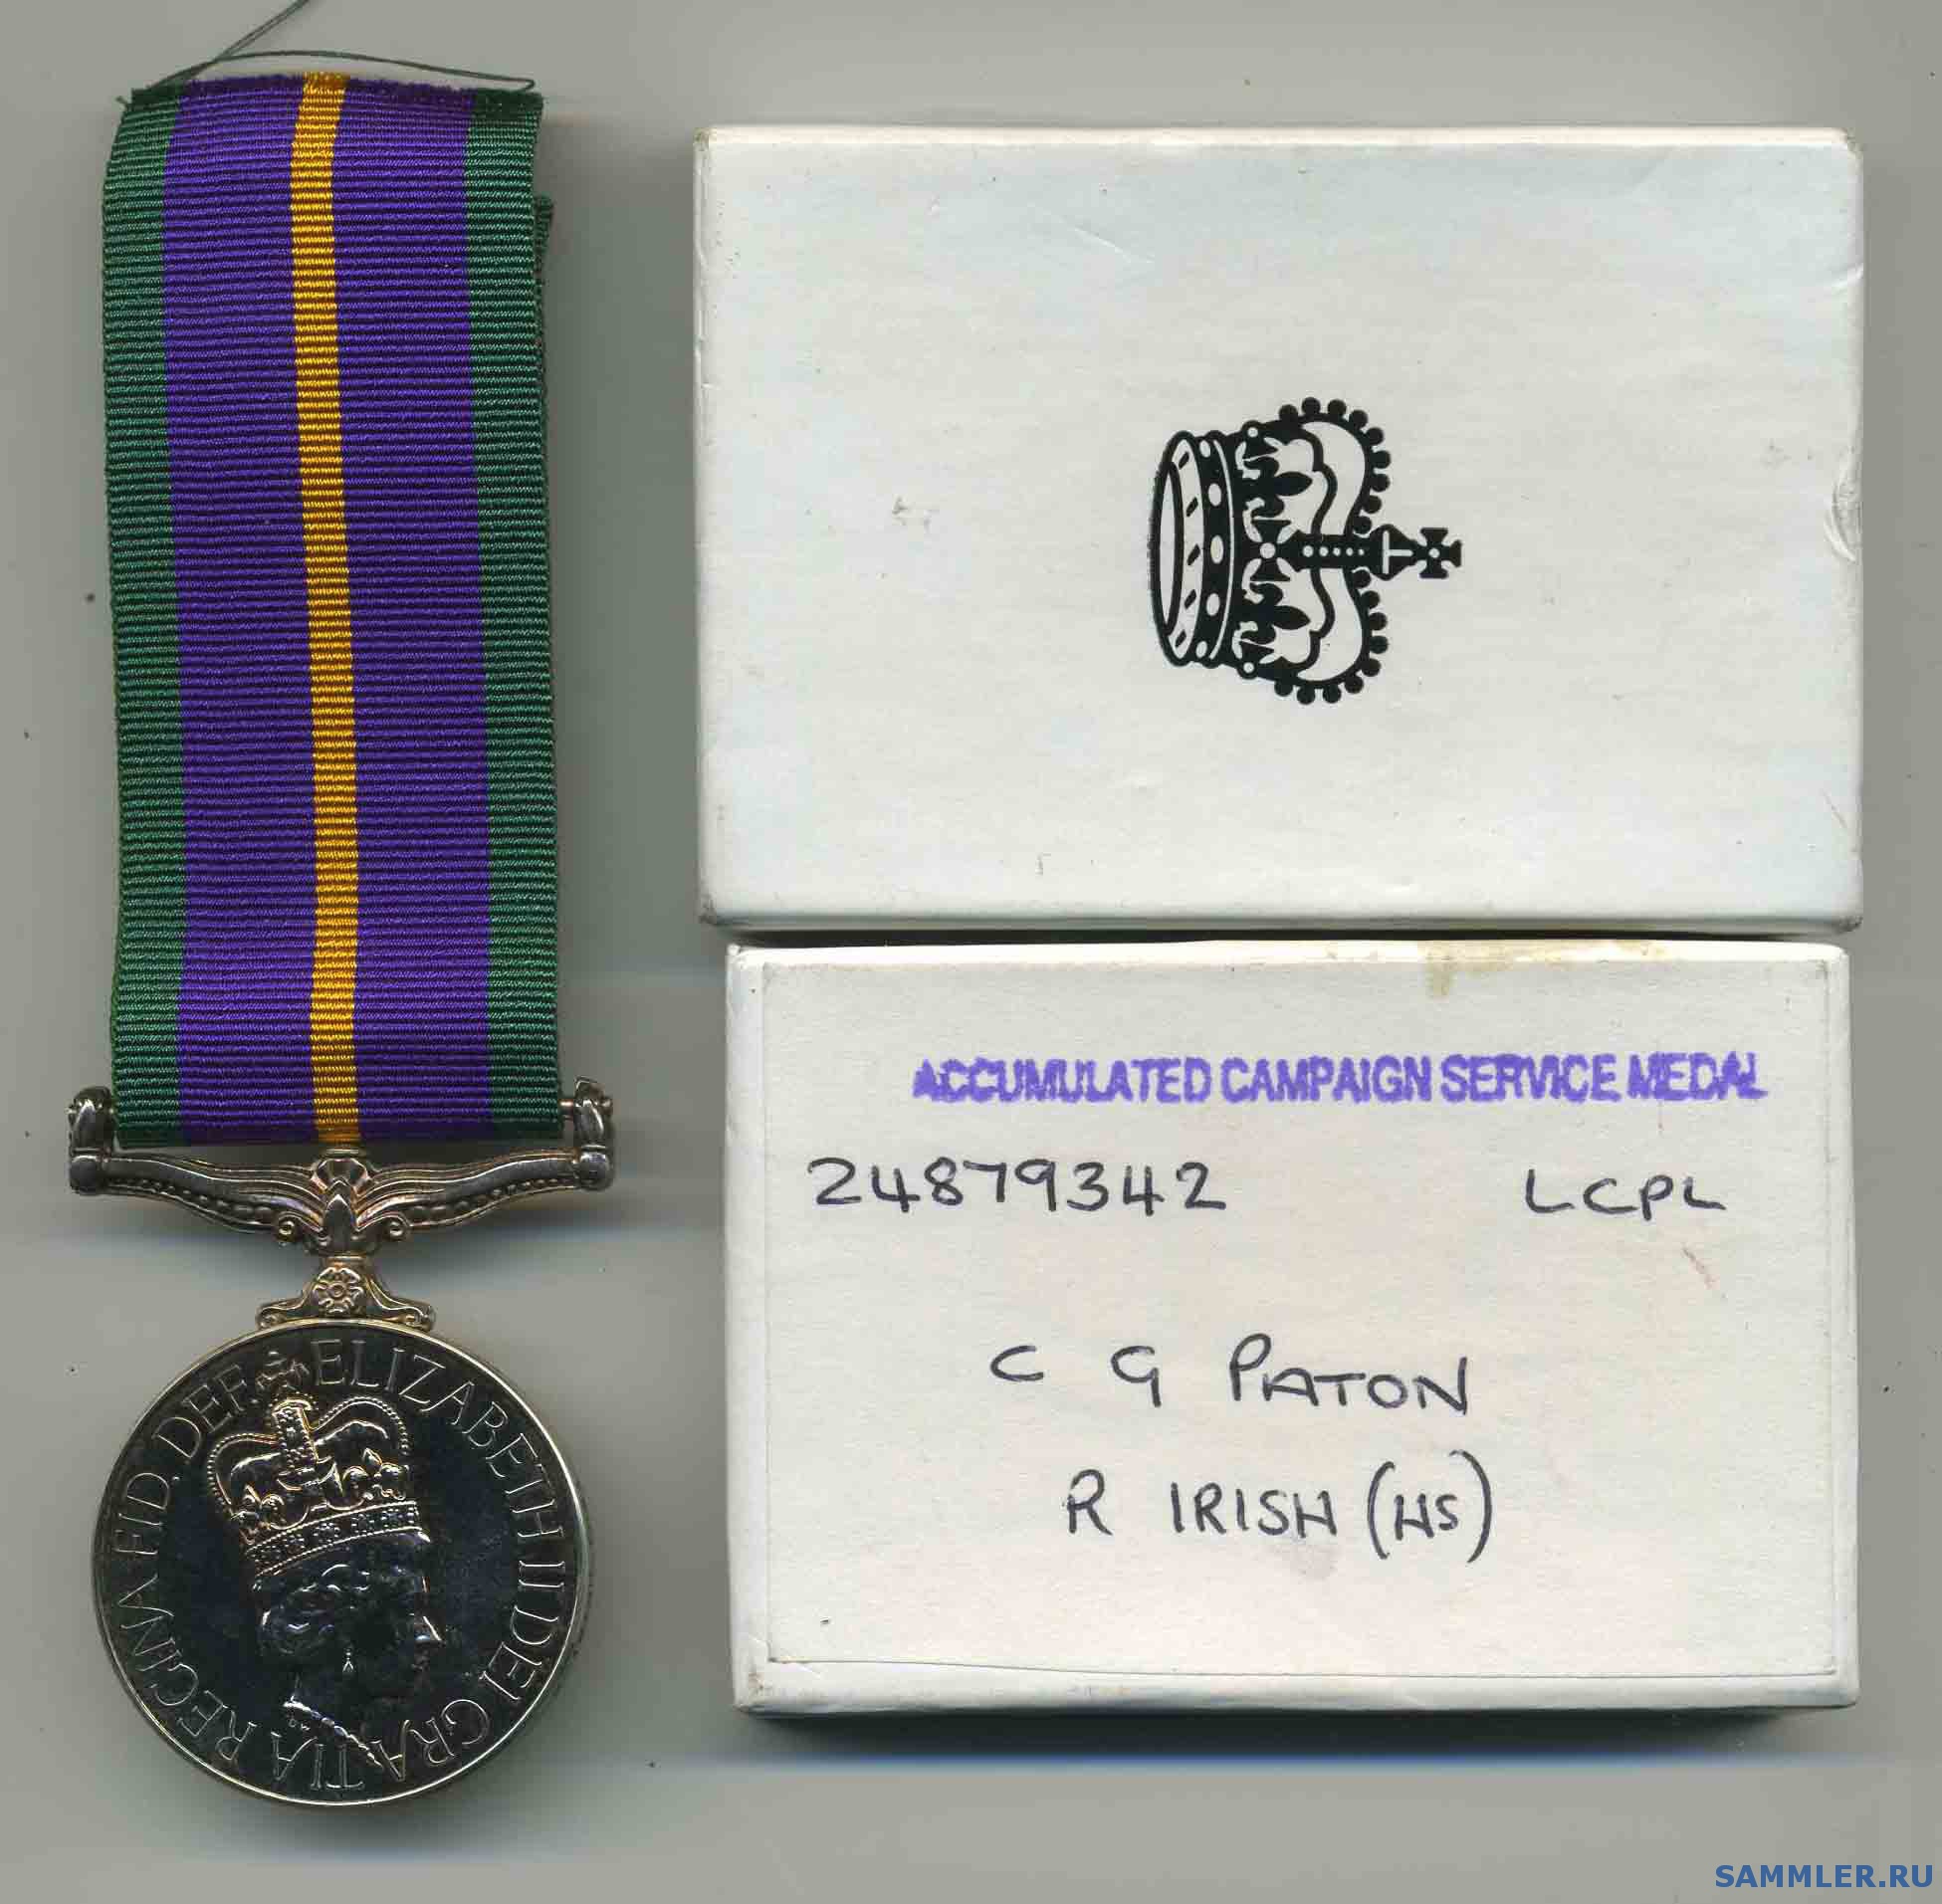 Accumulated_Campaign_Service_Medal_b.jpg